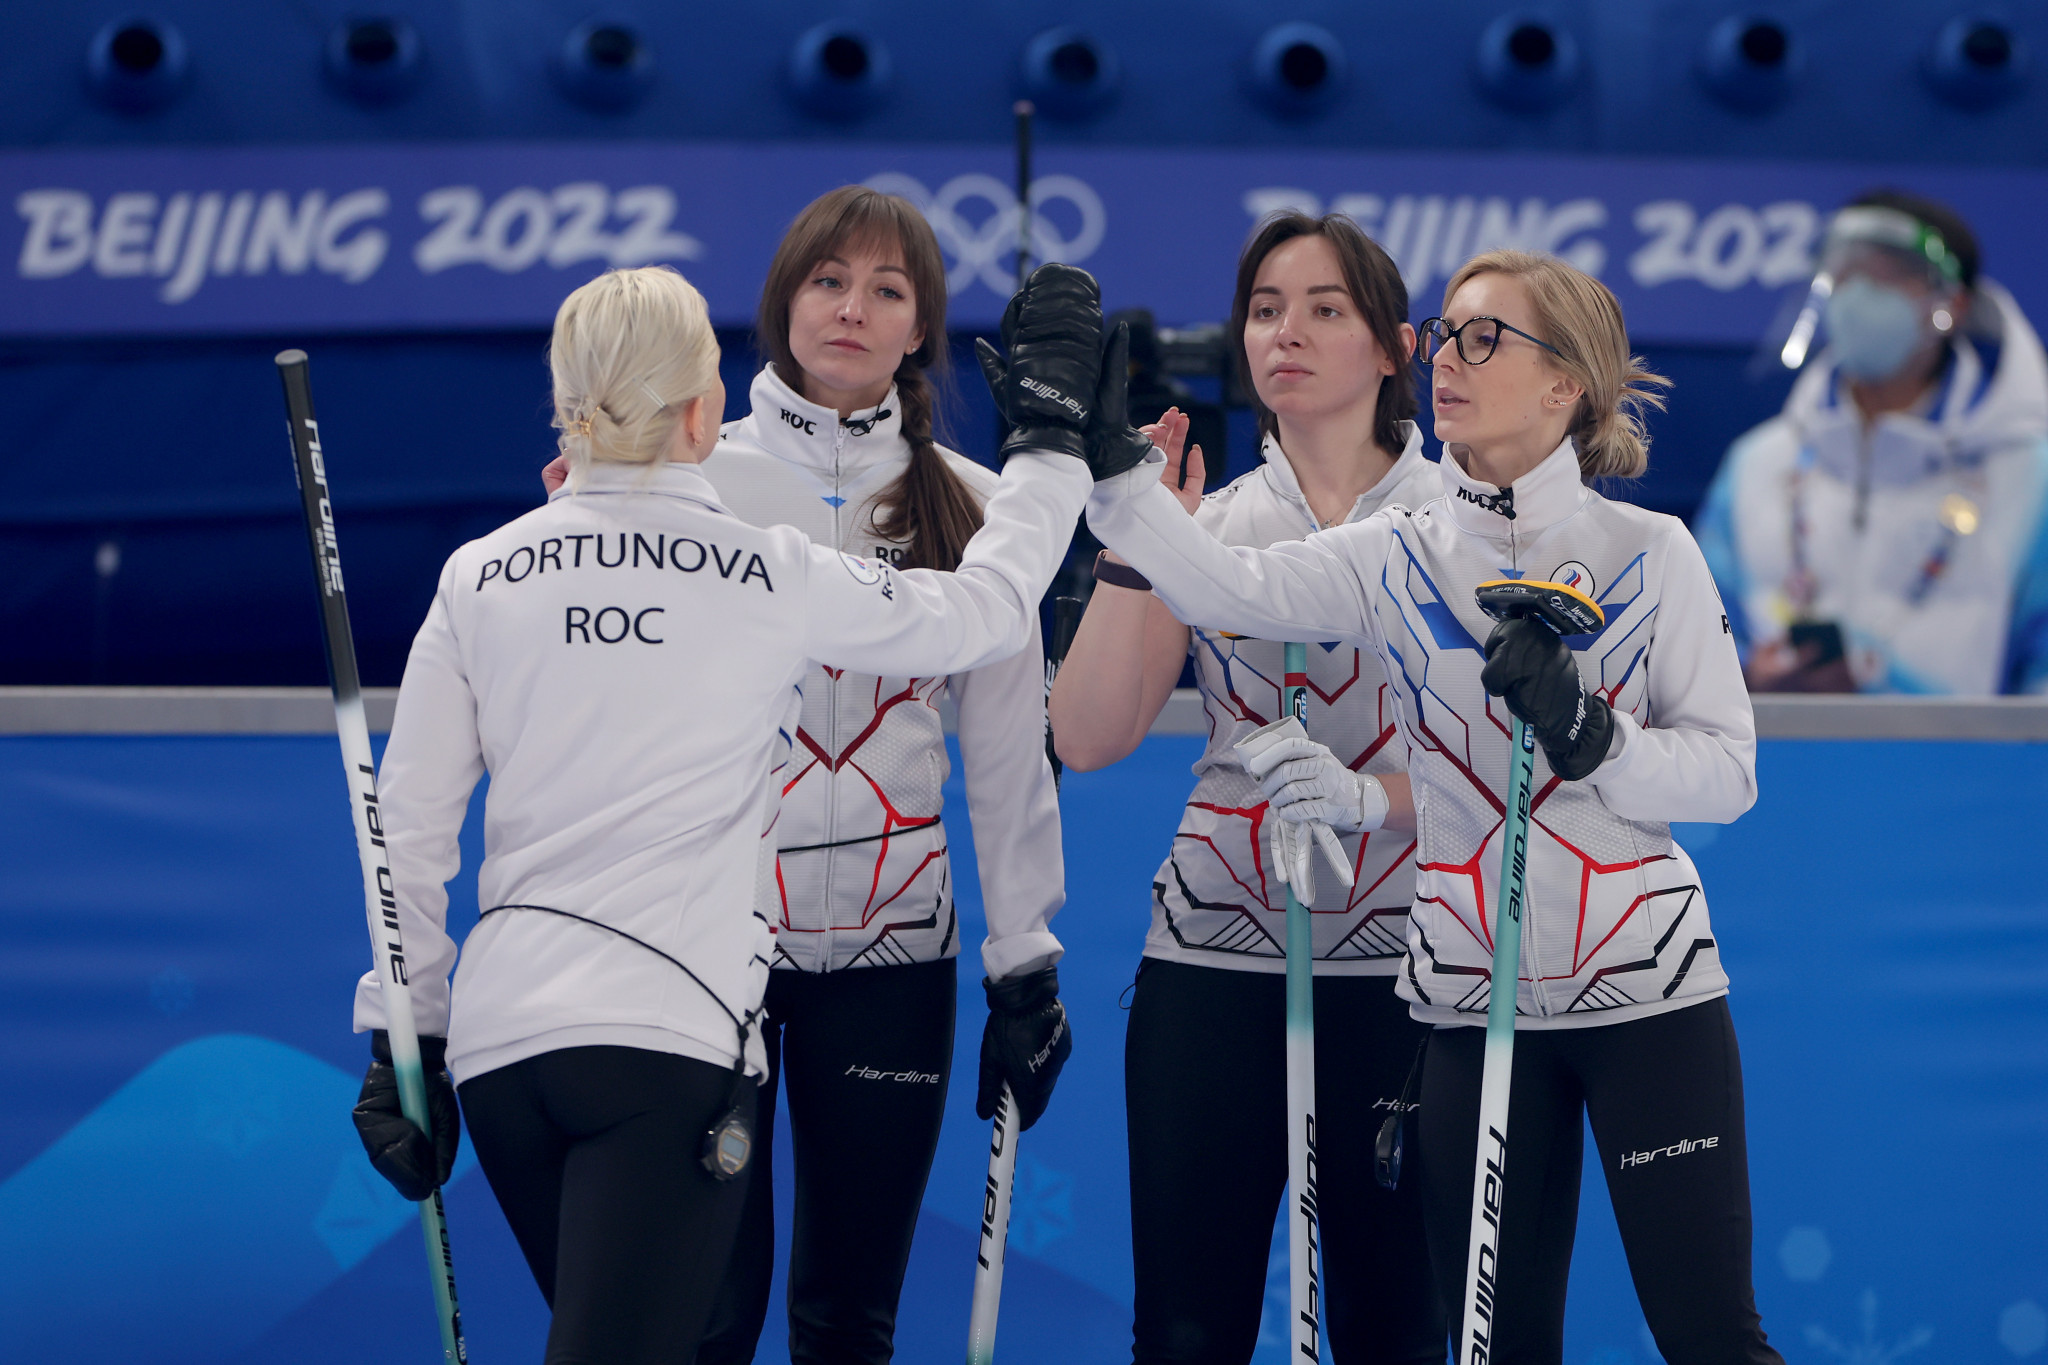 The Russian Olympic Committee women's team managed just one win in the curling competition during Beijing 2022 ©Getty Images